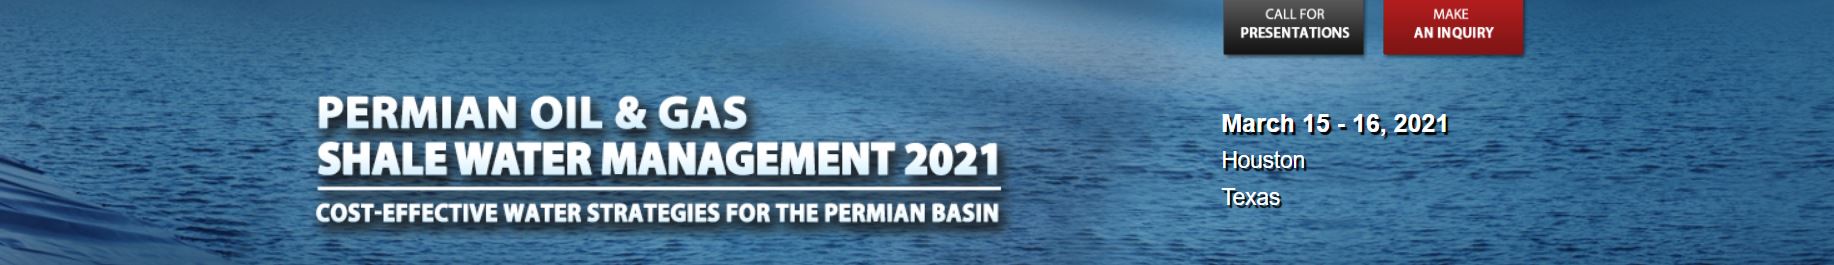 Physical Conference - Permian Shale Water Management 2021, Houston, Texas, United States